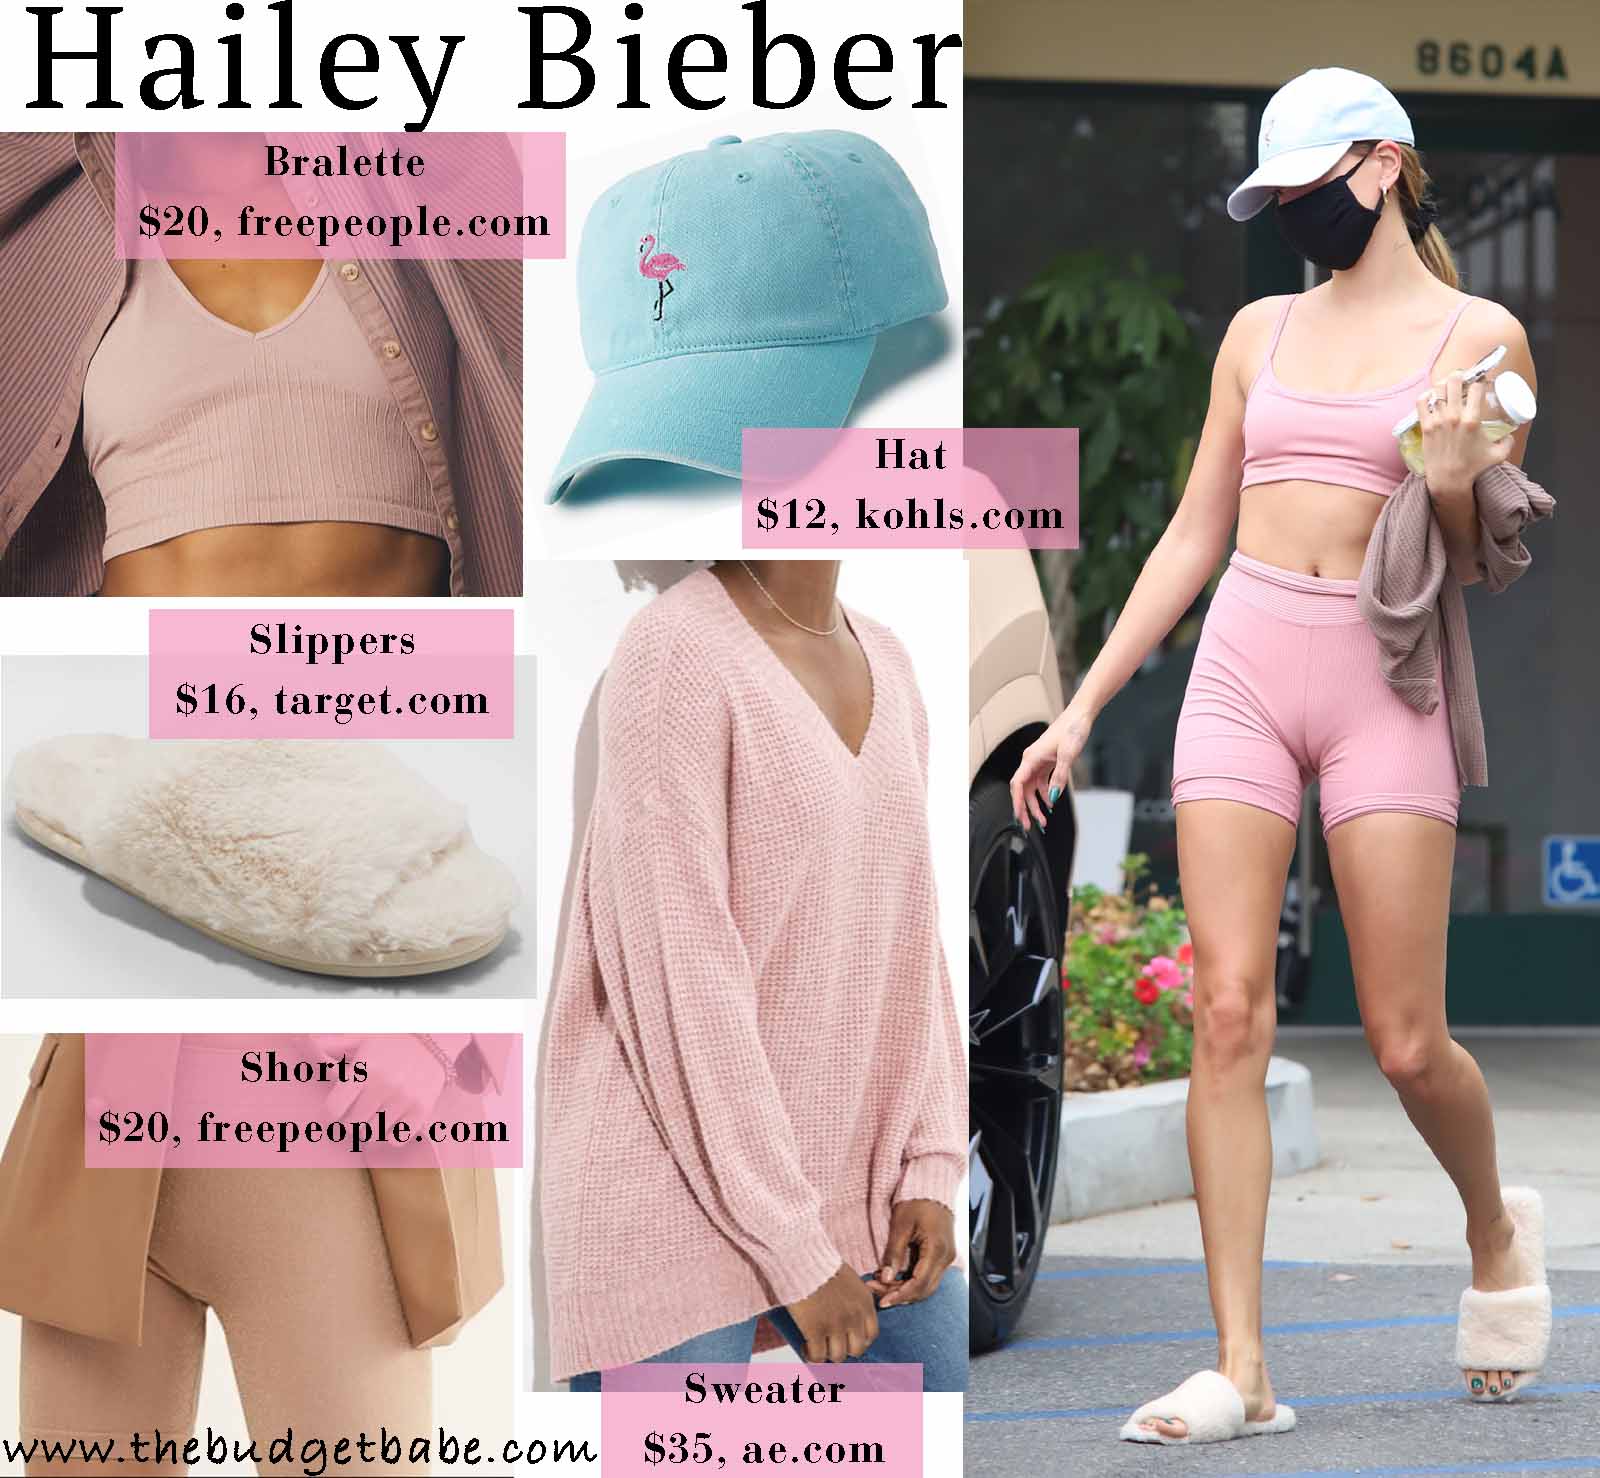 Hailey is pretty in pink!